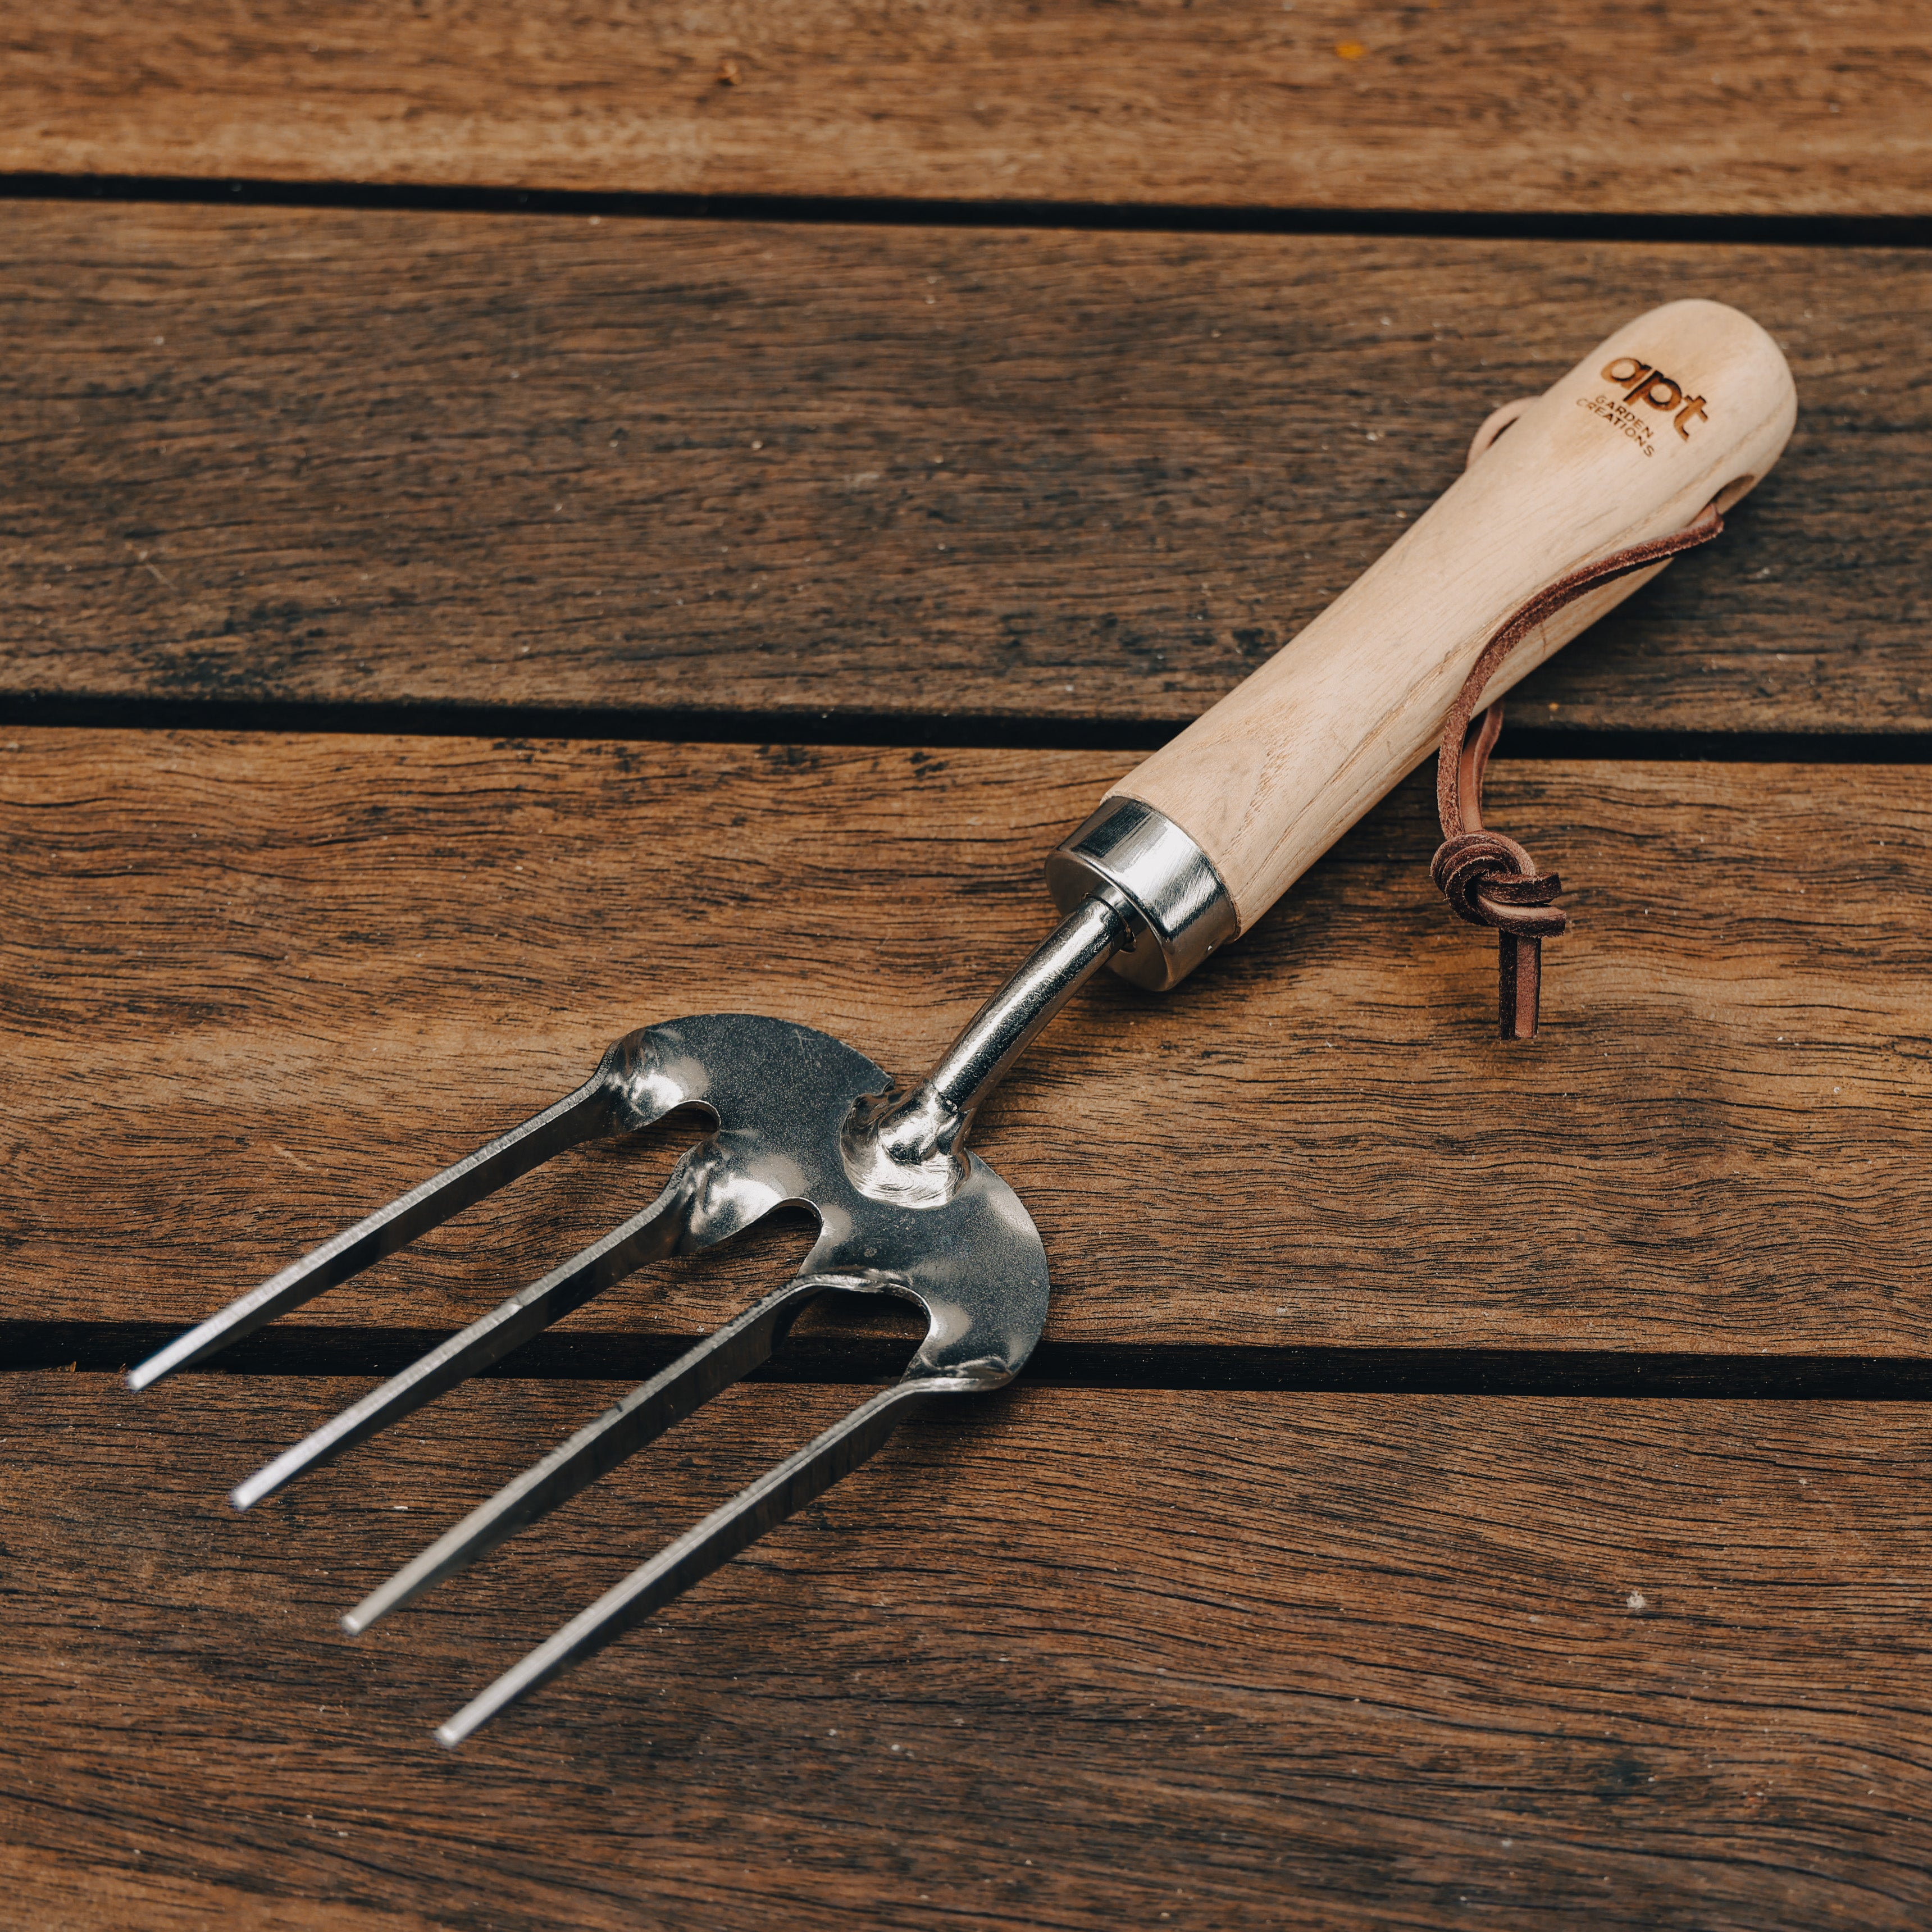 This stunning set of three garden tools, featuring ash-wood handles and stainless steel heads, a leather hang-strap and stylishly engraved with our Apt Garden Creations logo.